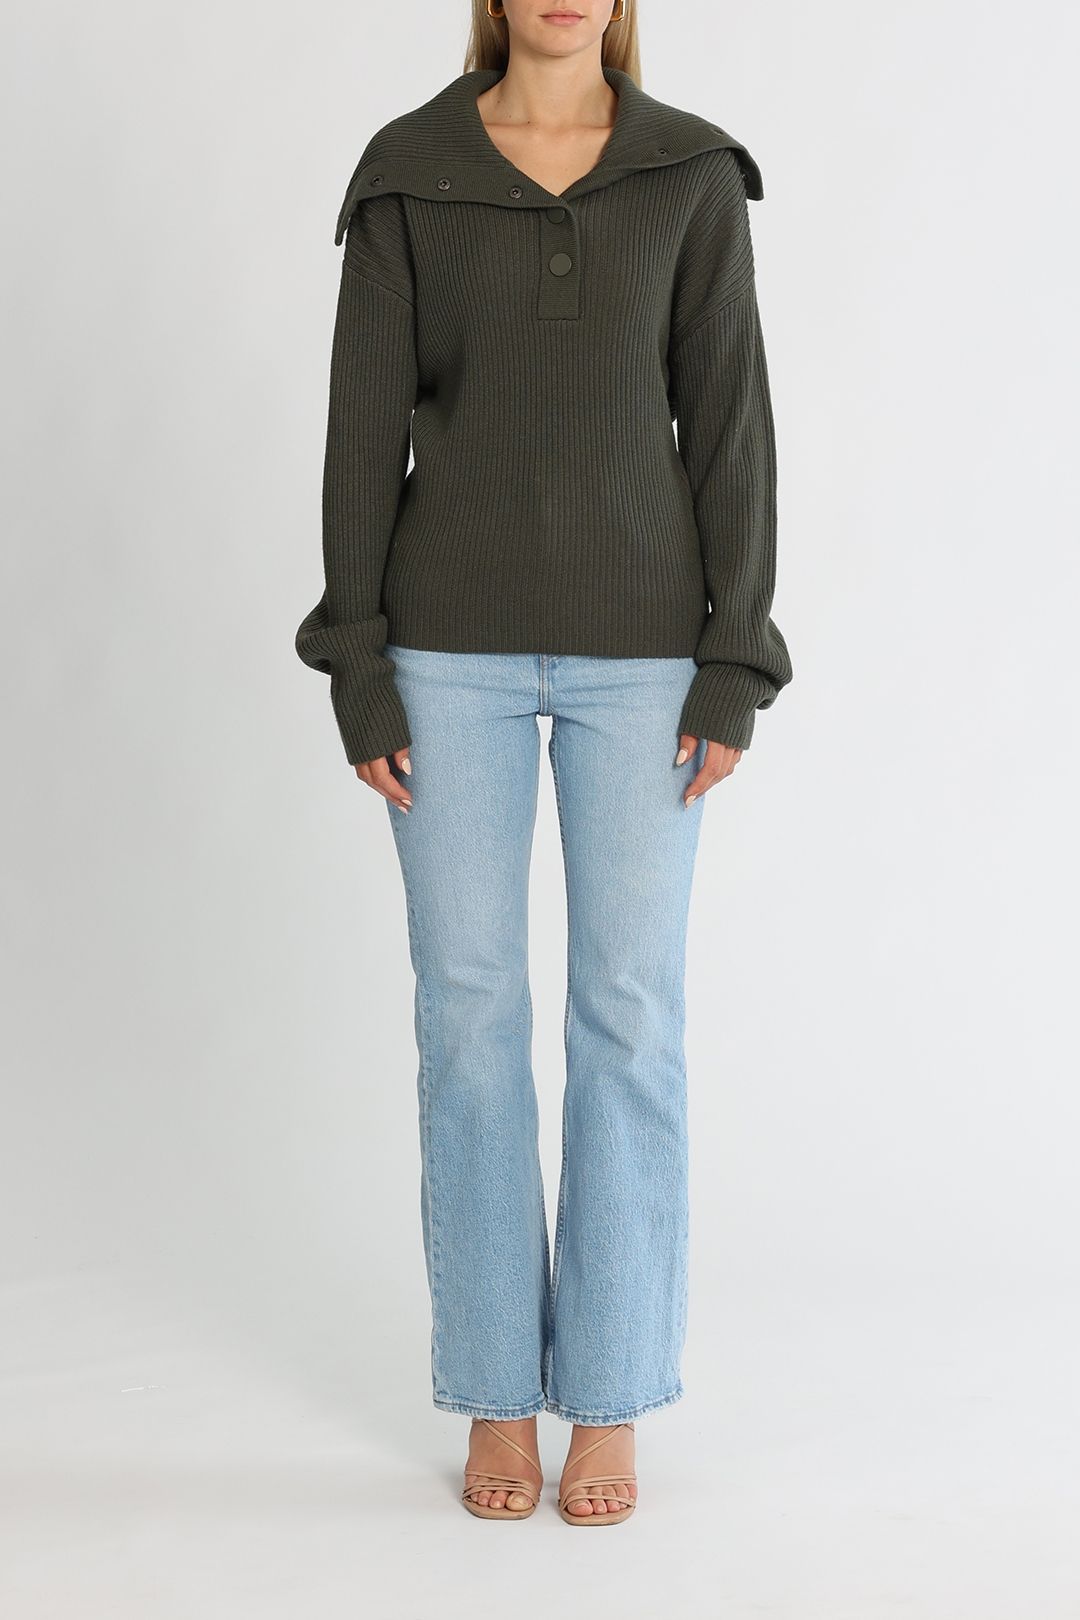 Camilla and Marc Dena Collared Knit Steel